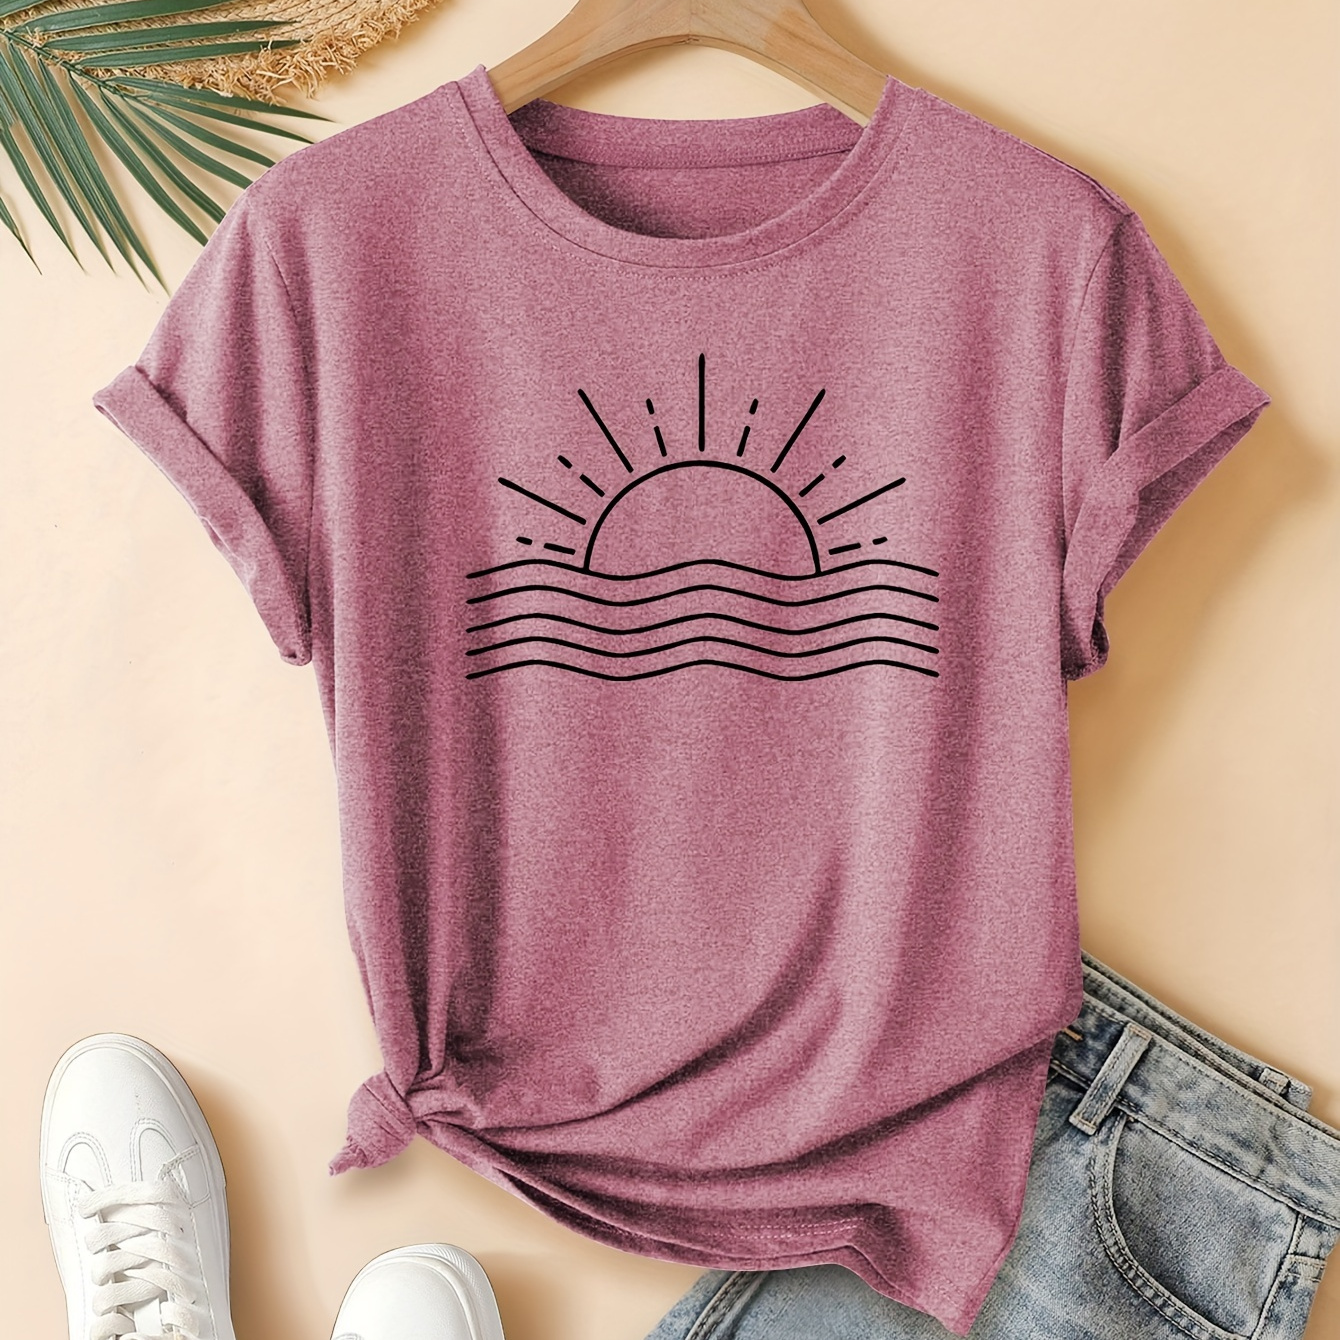 

Women's Vintage Sun And Waves Print Round Neck Short Sleeve T-shirt, Fashionable Retro Casual Summer Tee